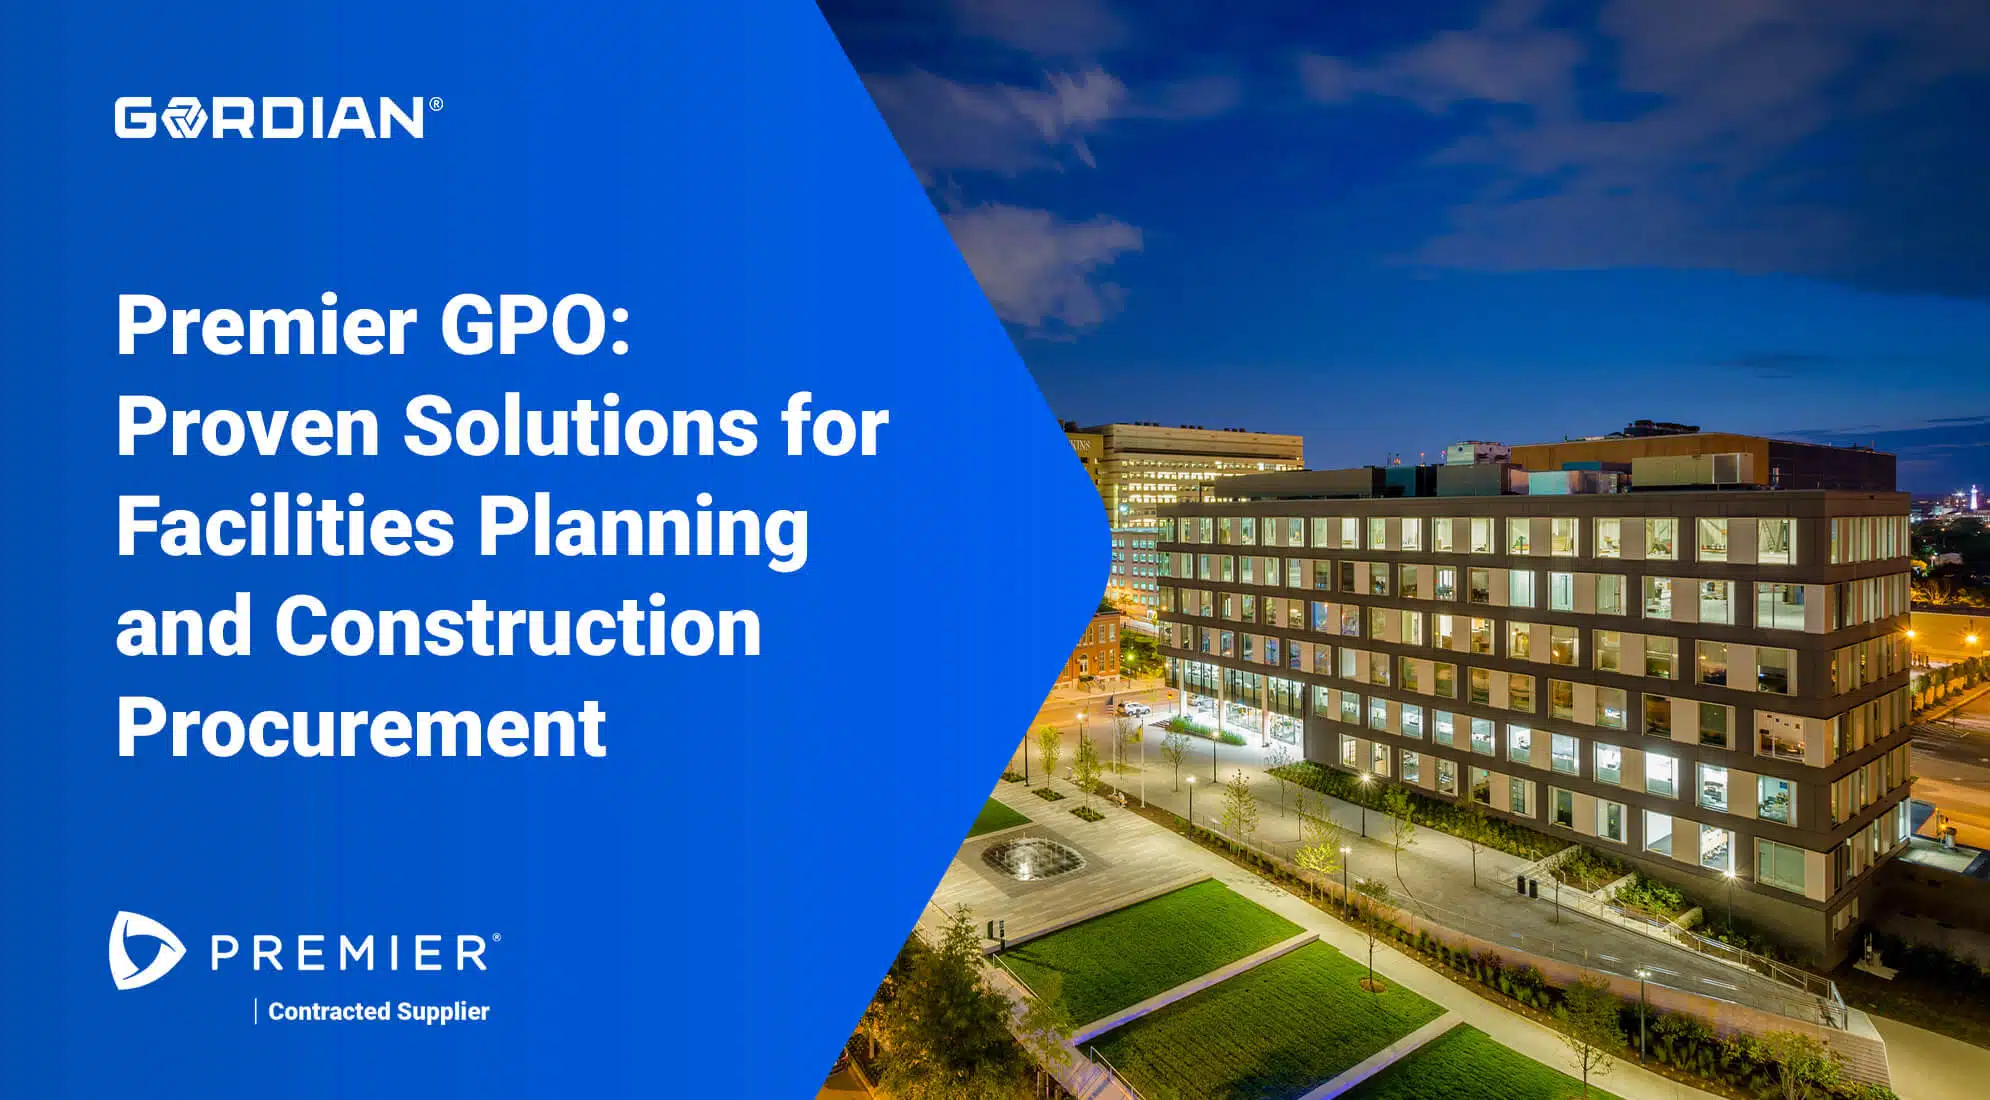 Premier GPO: Proven Solutions for Facilities Planning and Construction Procurement